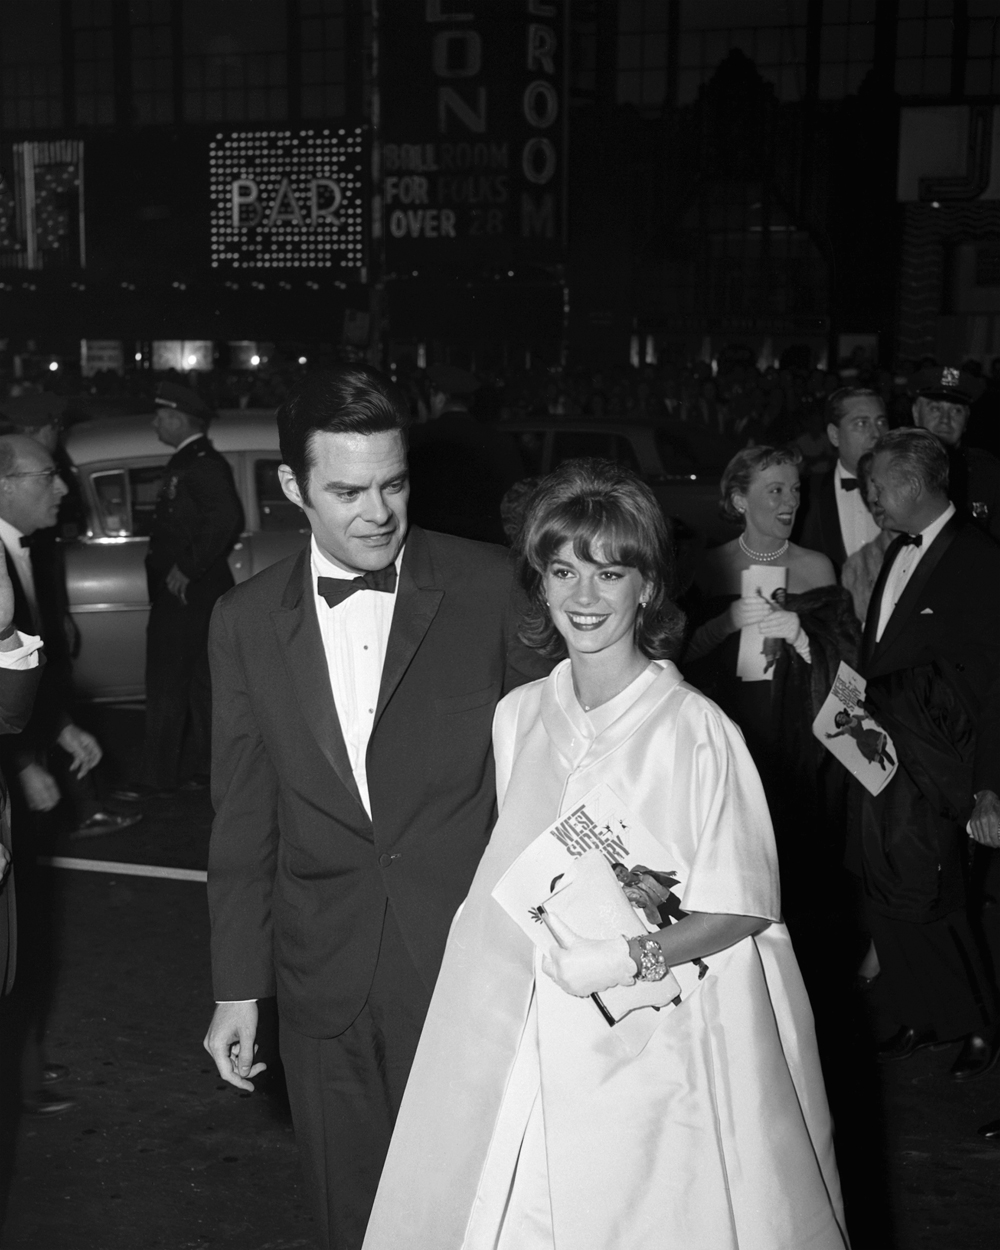 Jerry with Natalie Wood  [Photo Composite]